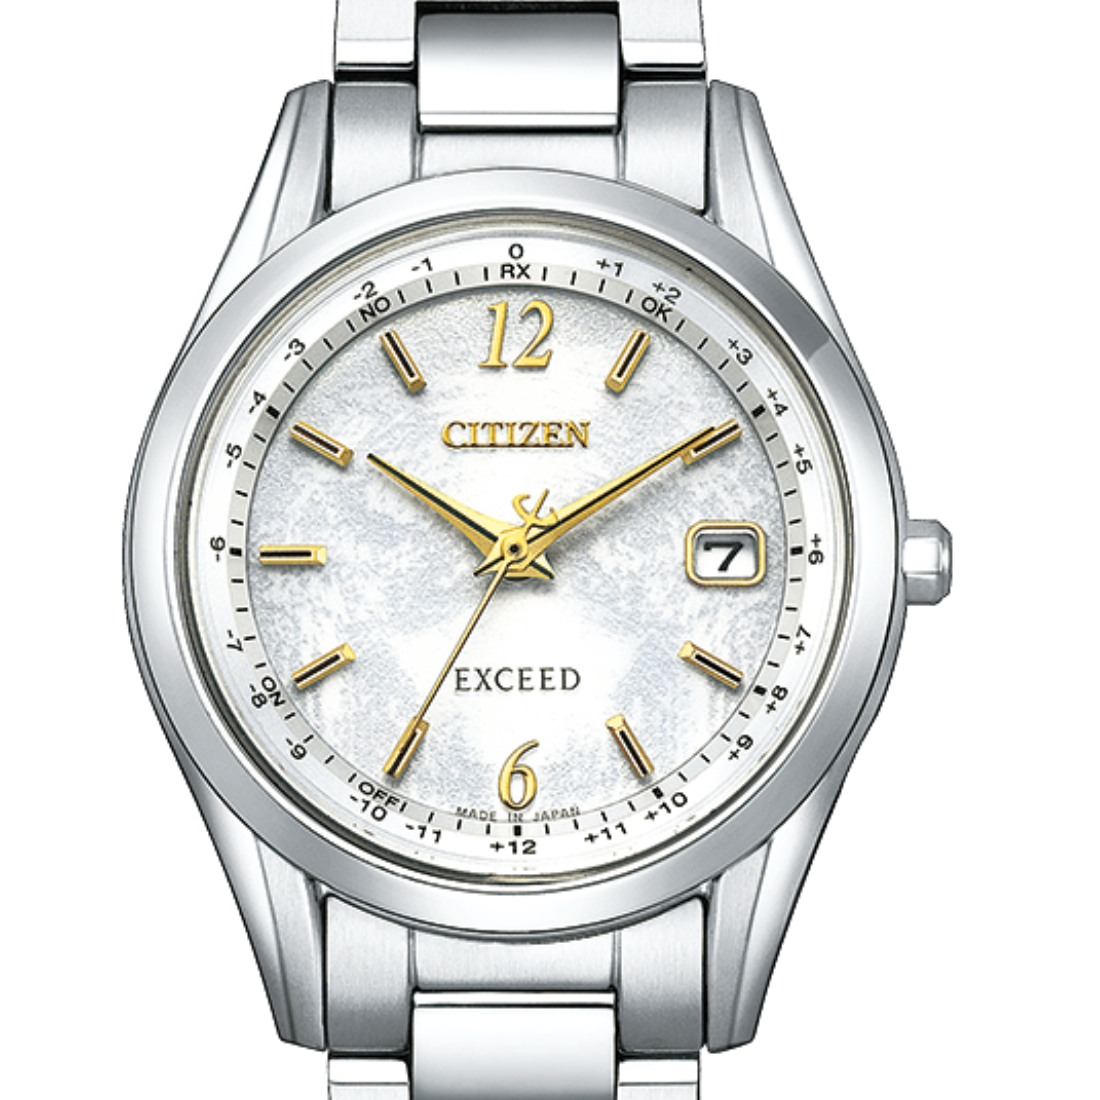 Citizen Exceed Eco-Drive ES9370-71A  Limited Edition Titanium Watch